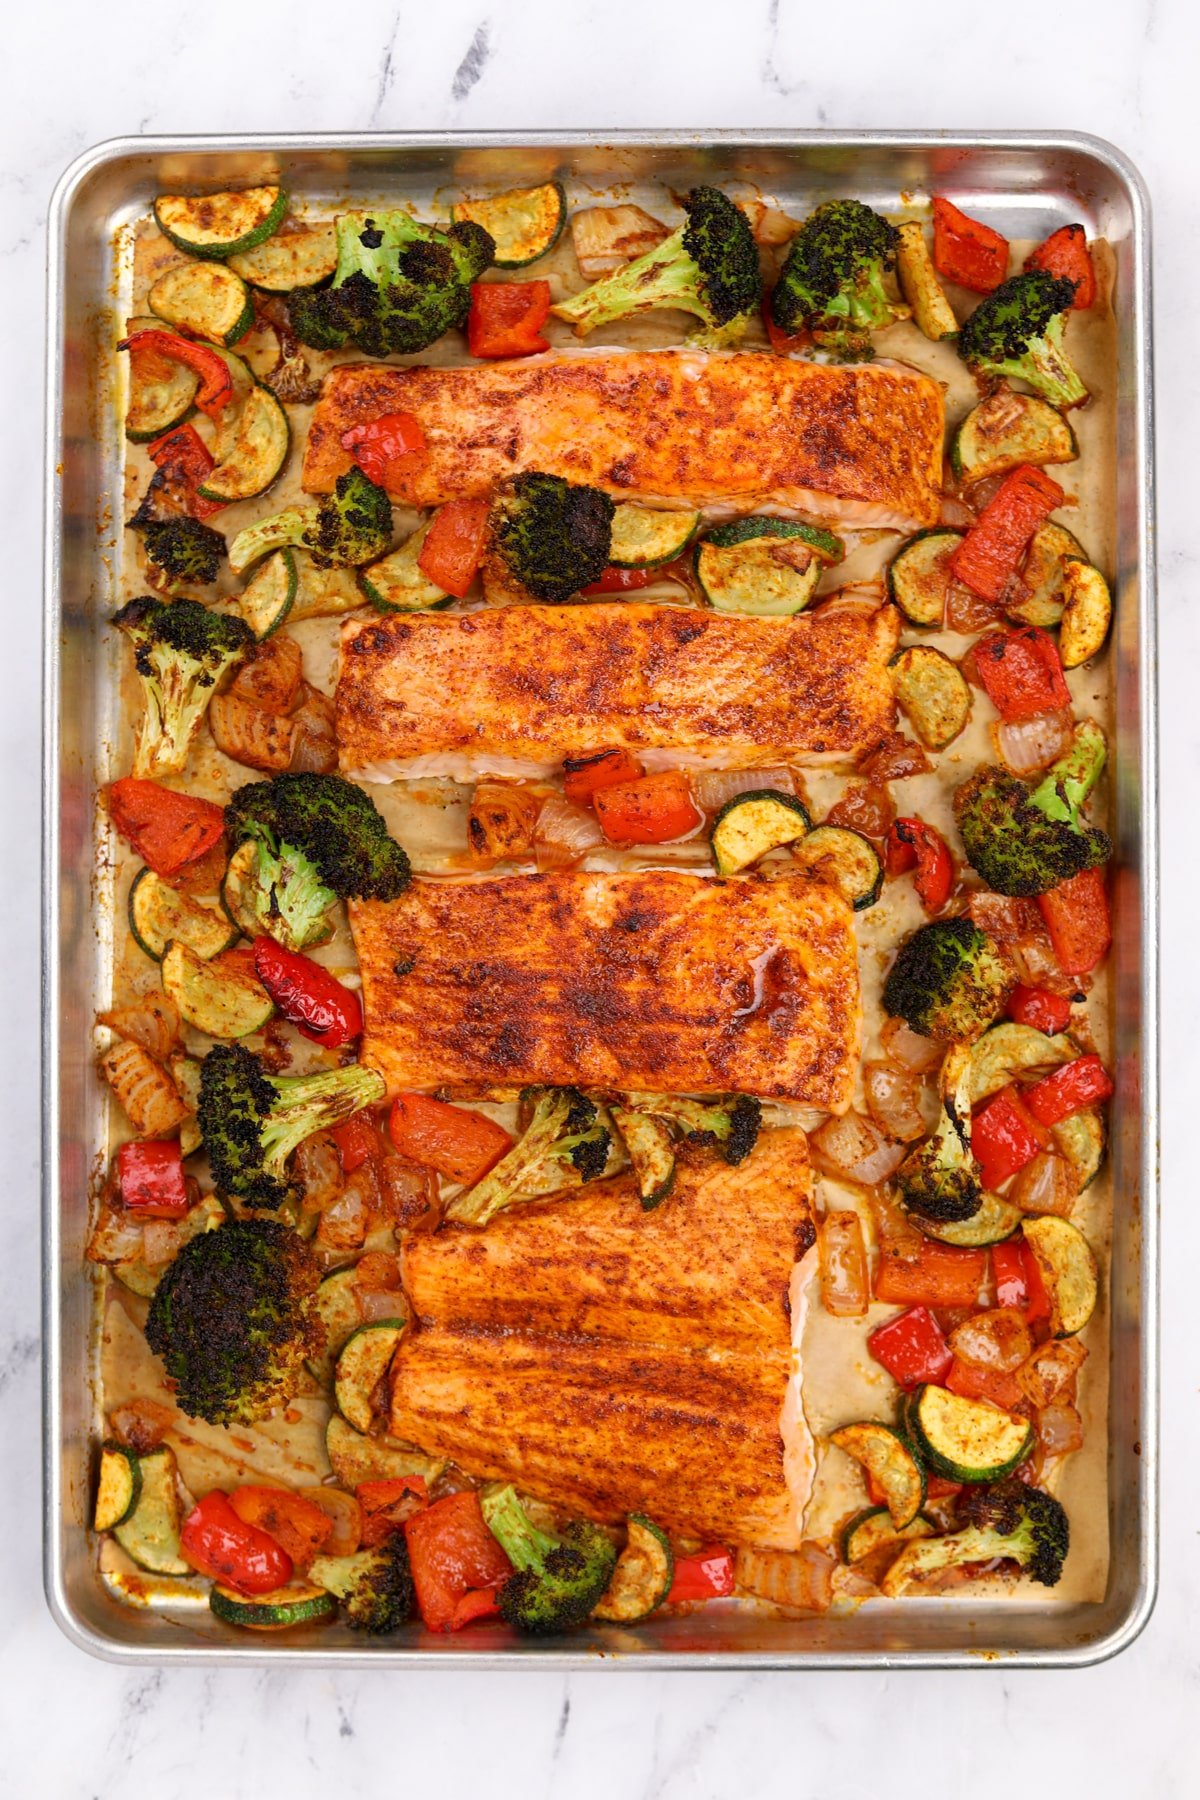 A sheet pan with roasted vegetables and salmon fillets.